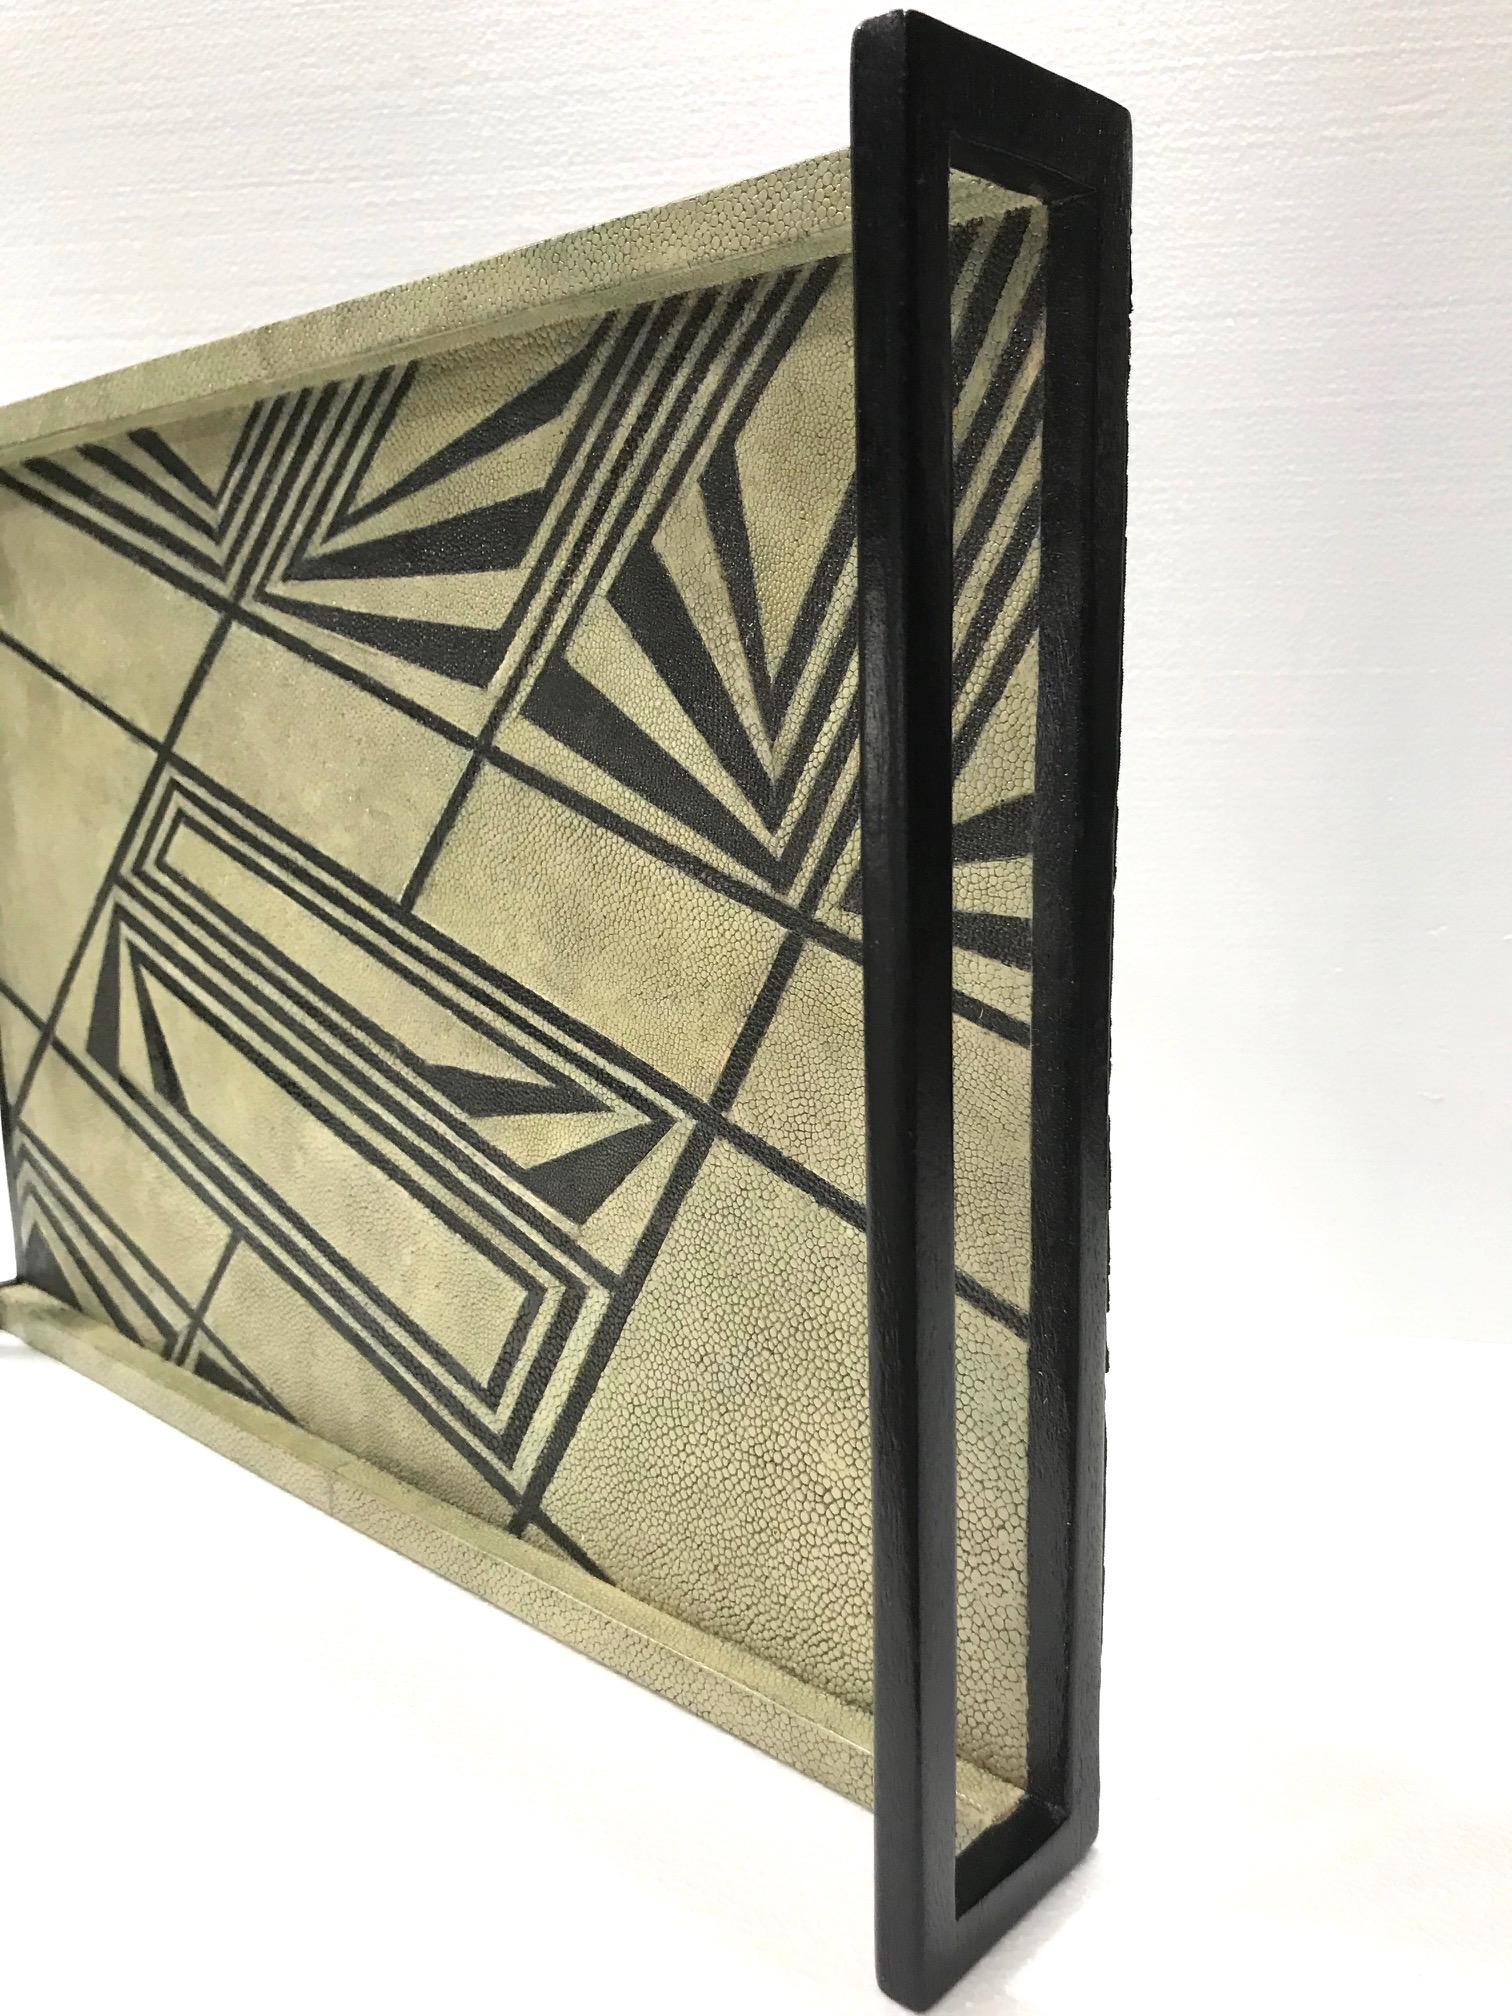 Ebonized Vintage R & Y Augousti Shagreen Tray with Geometric Design in Taupe and Black